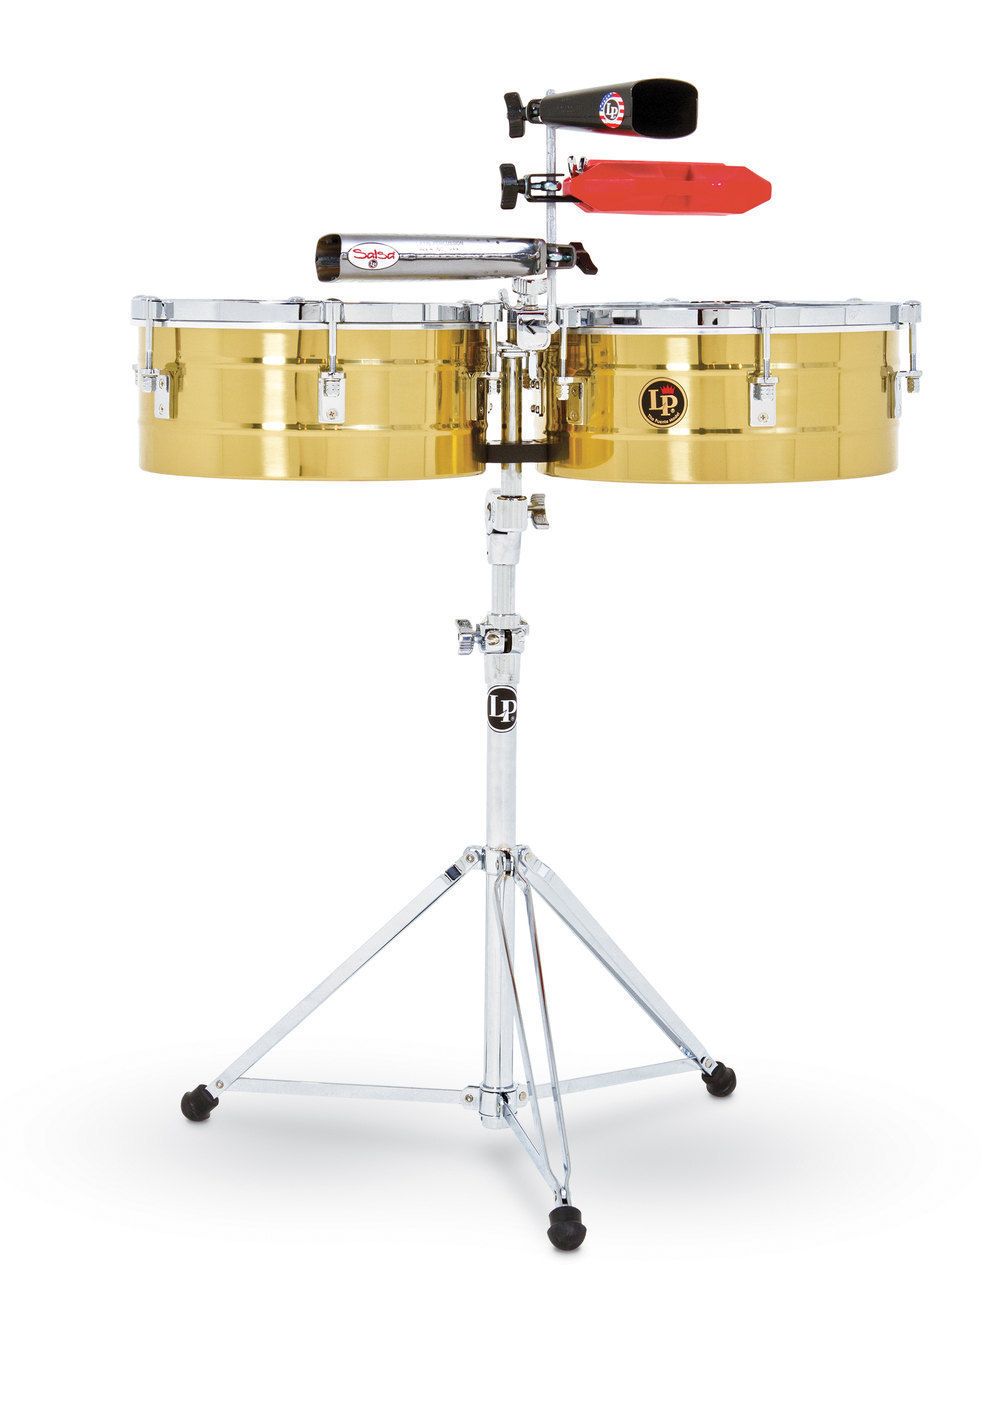 LP ティンバレス LP256-S LP Tito Puente Timbales 13″ 14″Shells, Stainless Steel  LP-256-S